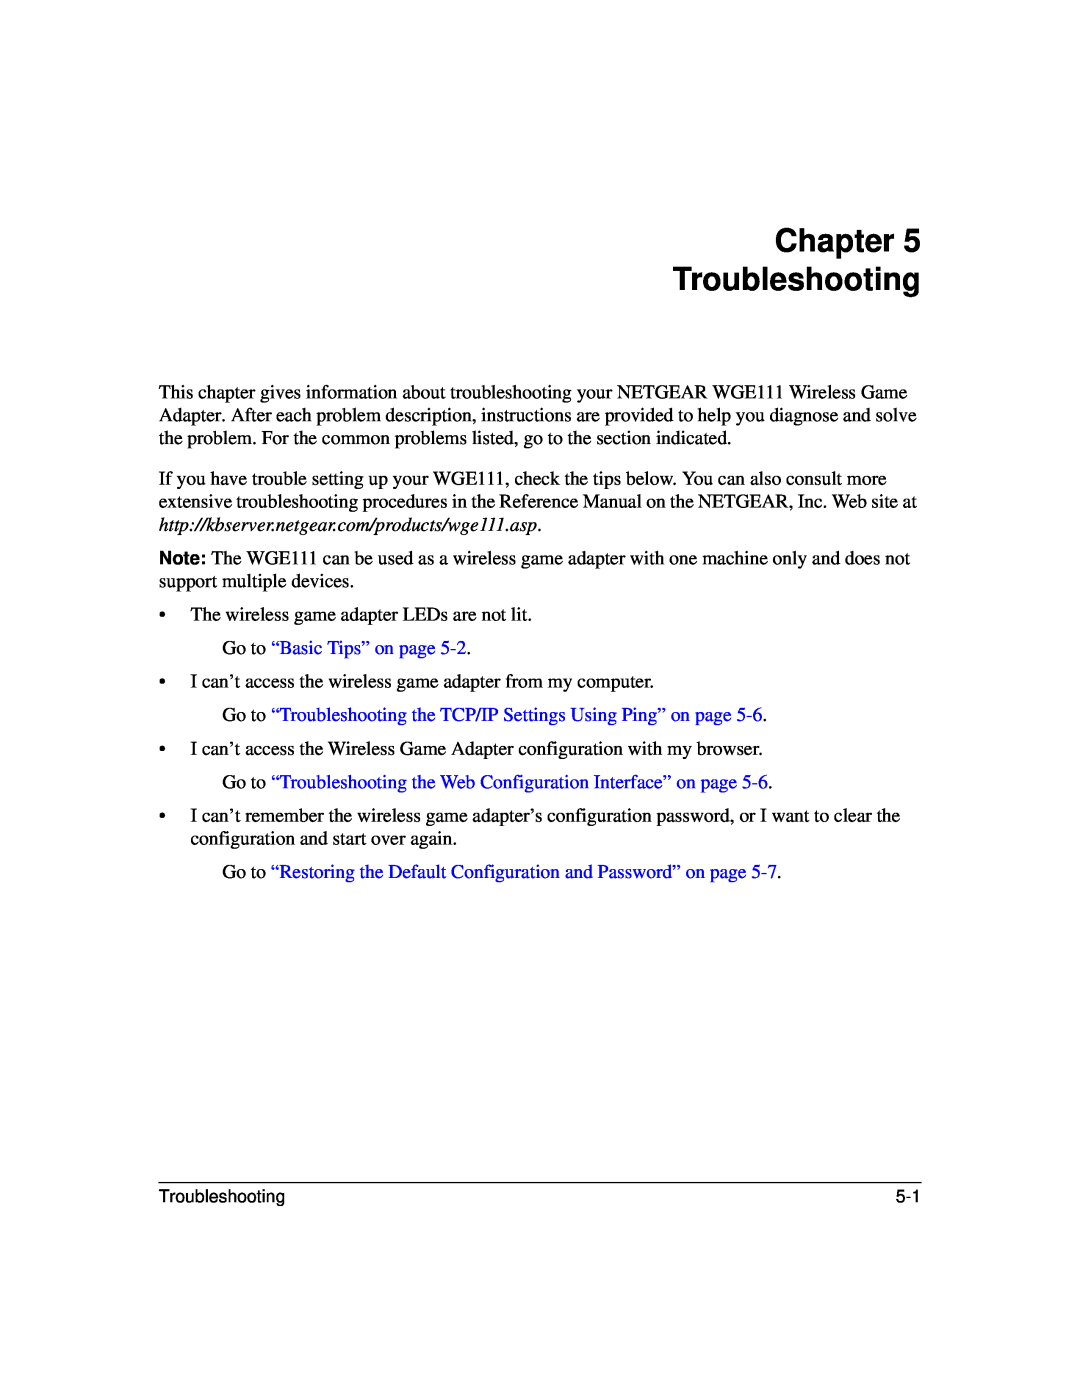 NETGEAR WGE111 user manual Chapter Troubleshooting, Go to “Troubleshooting the TCP/IP Settings Using Ping” on page 